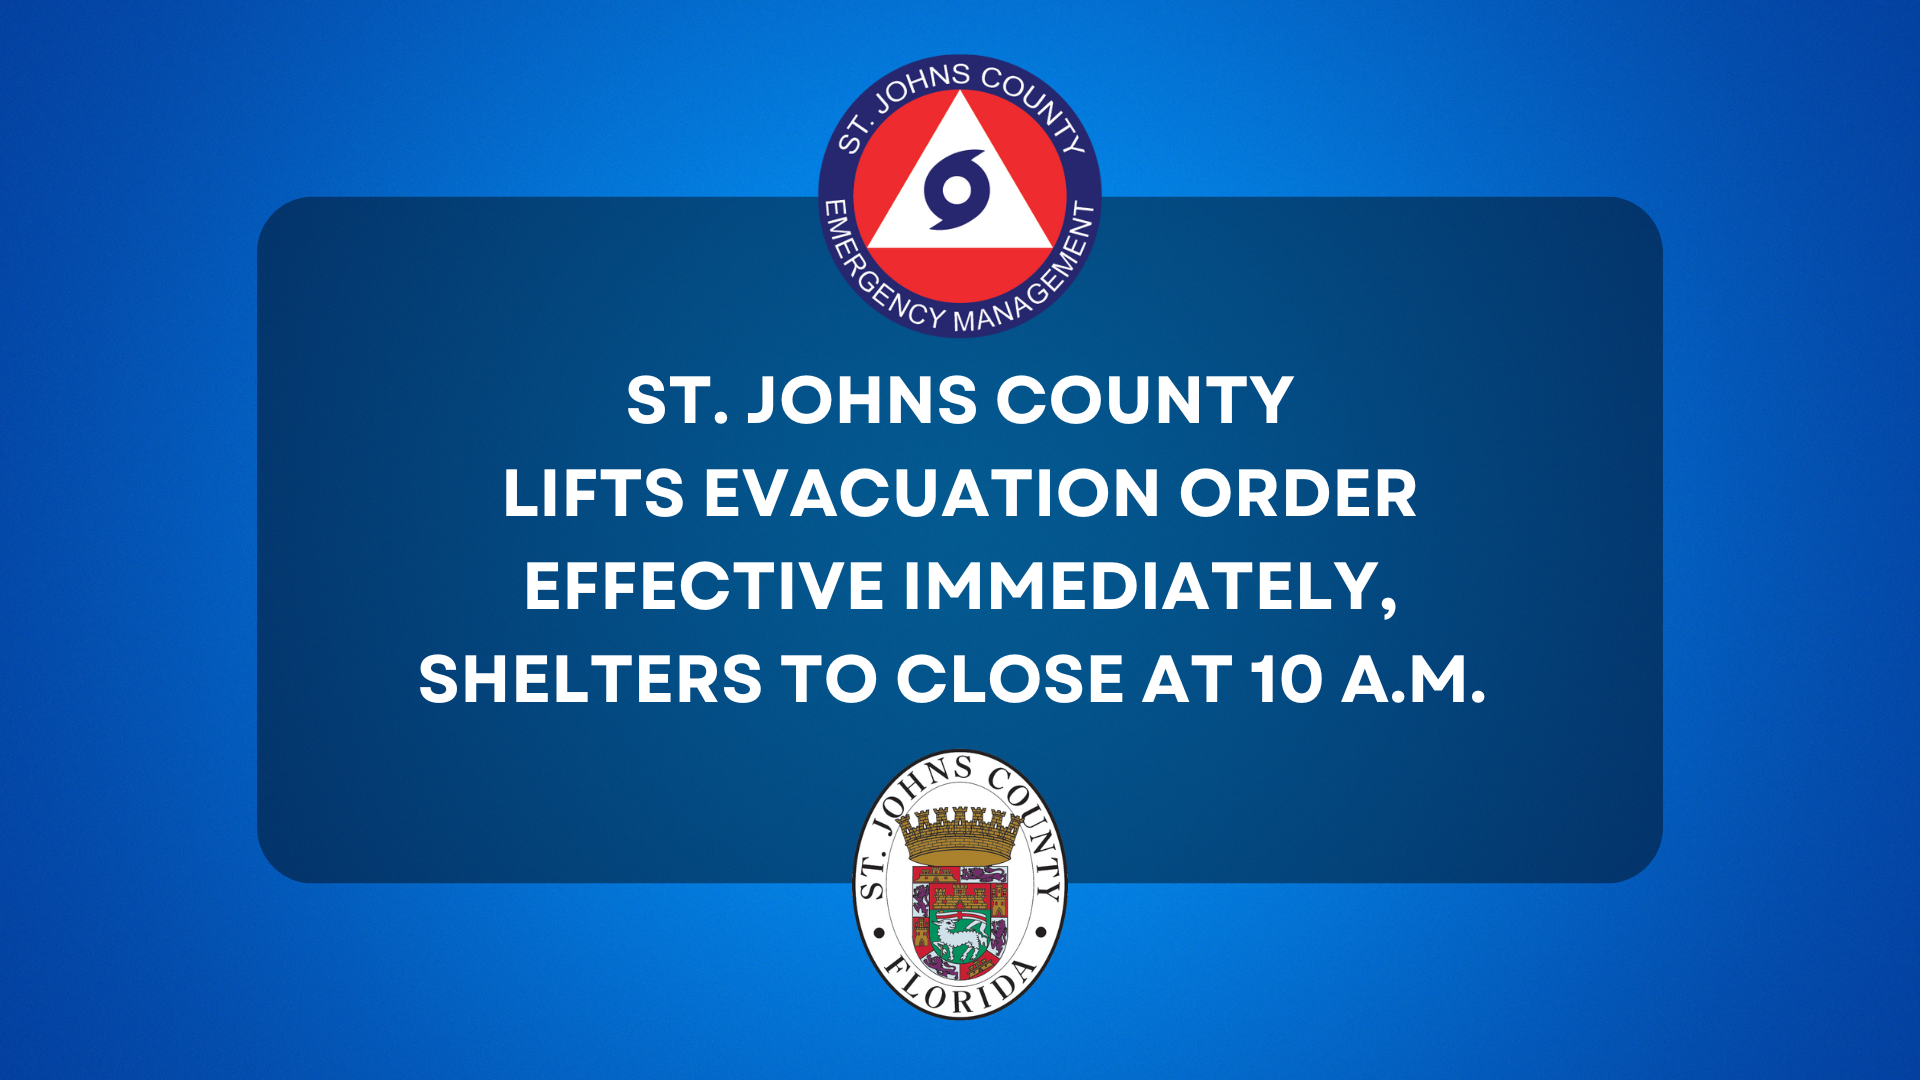 St. Johns County Lifts Evacuation Order Effective Immediately, Shelters to close at 10 AM